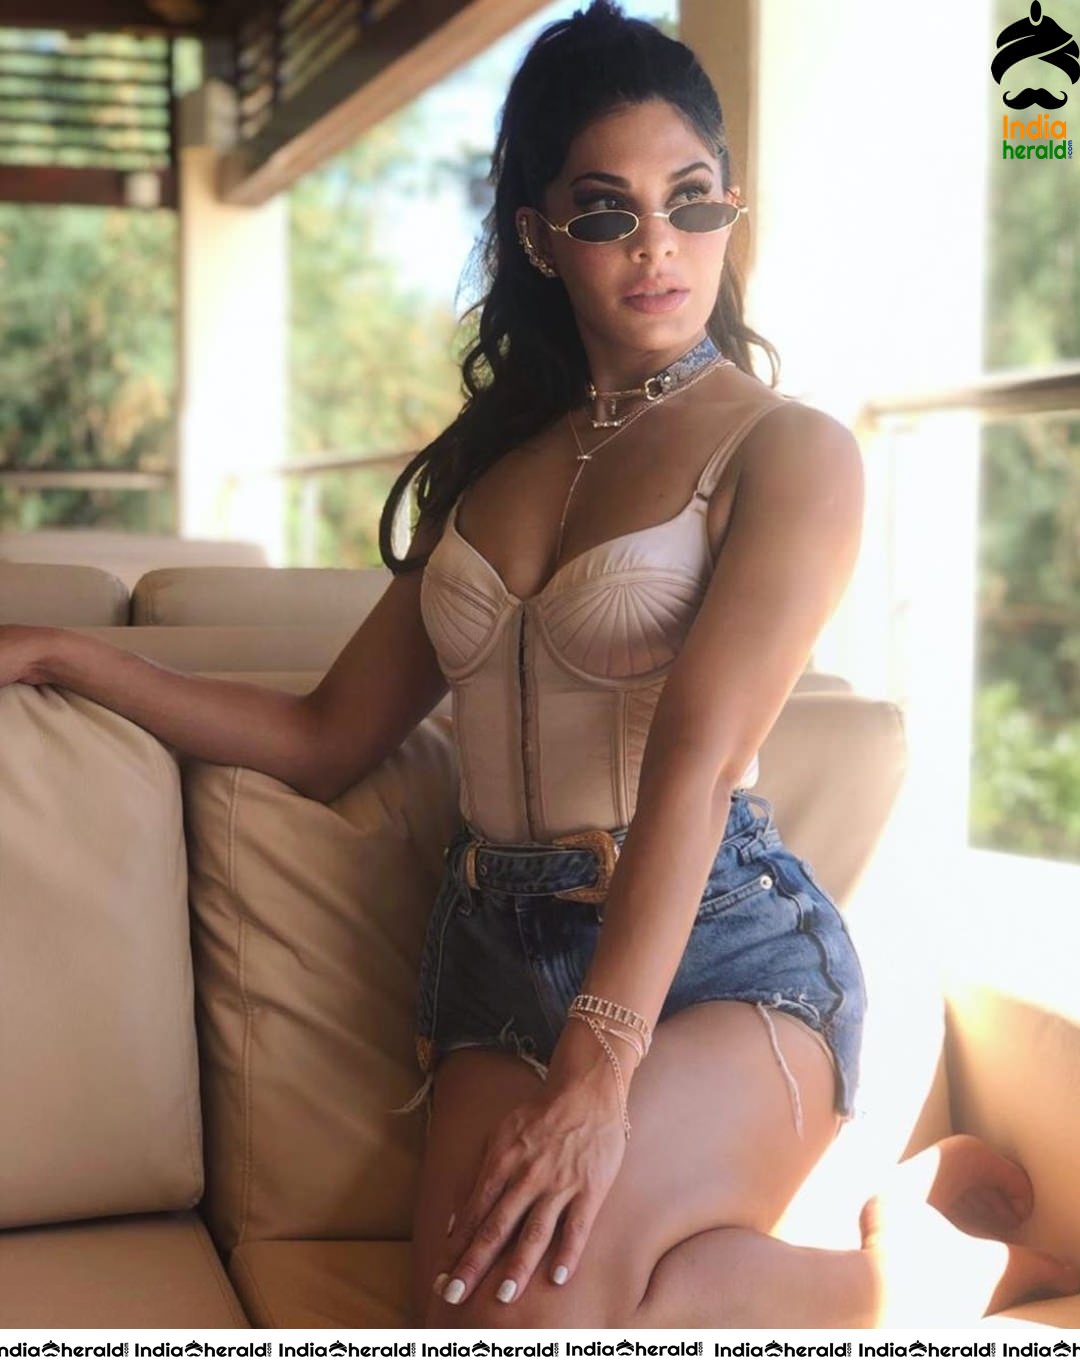 Jacqueline Fernandez Too Hot to Handle in these Photos Set 2